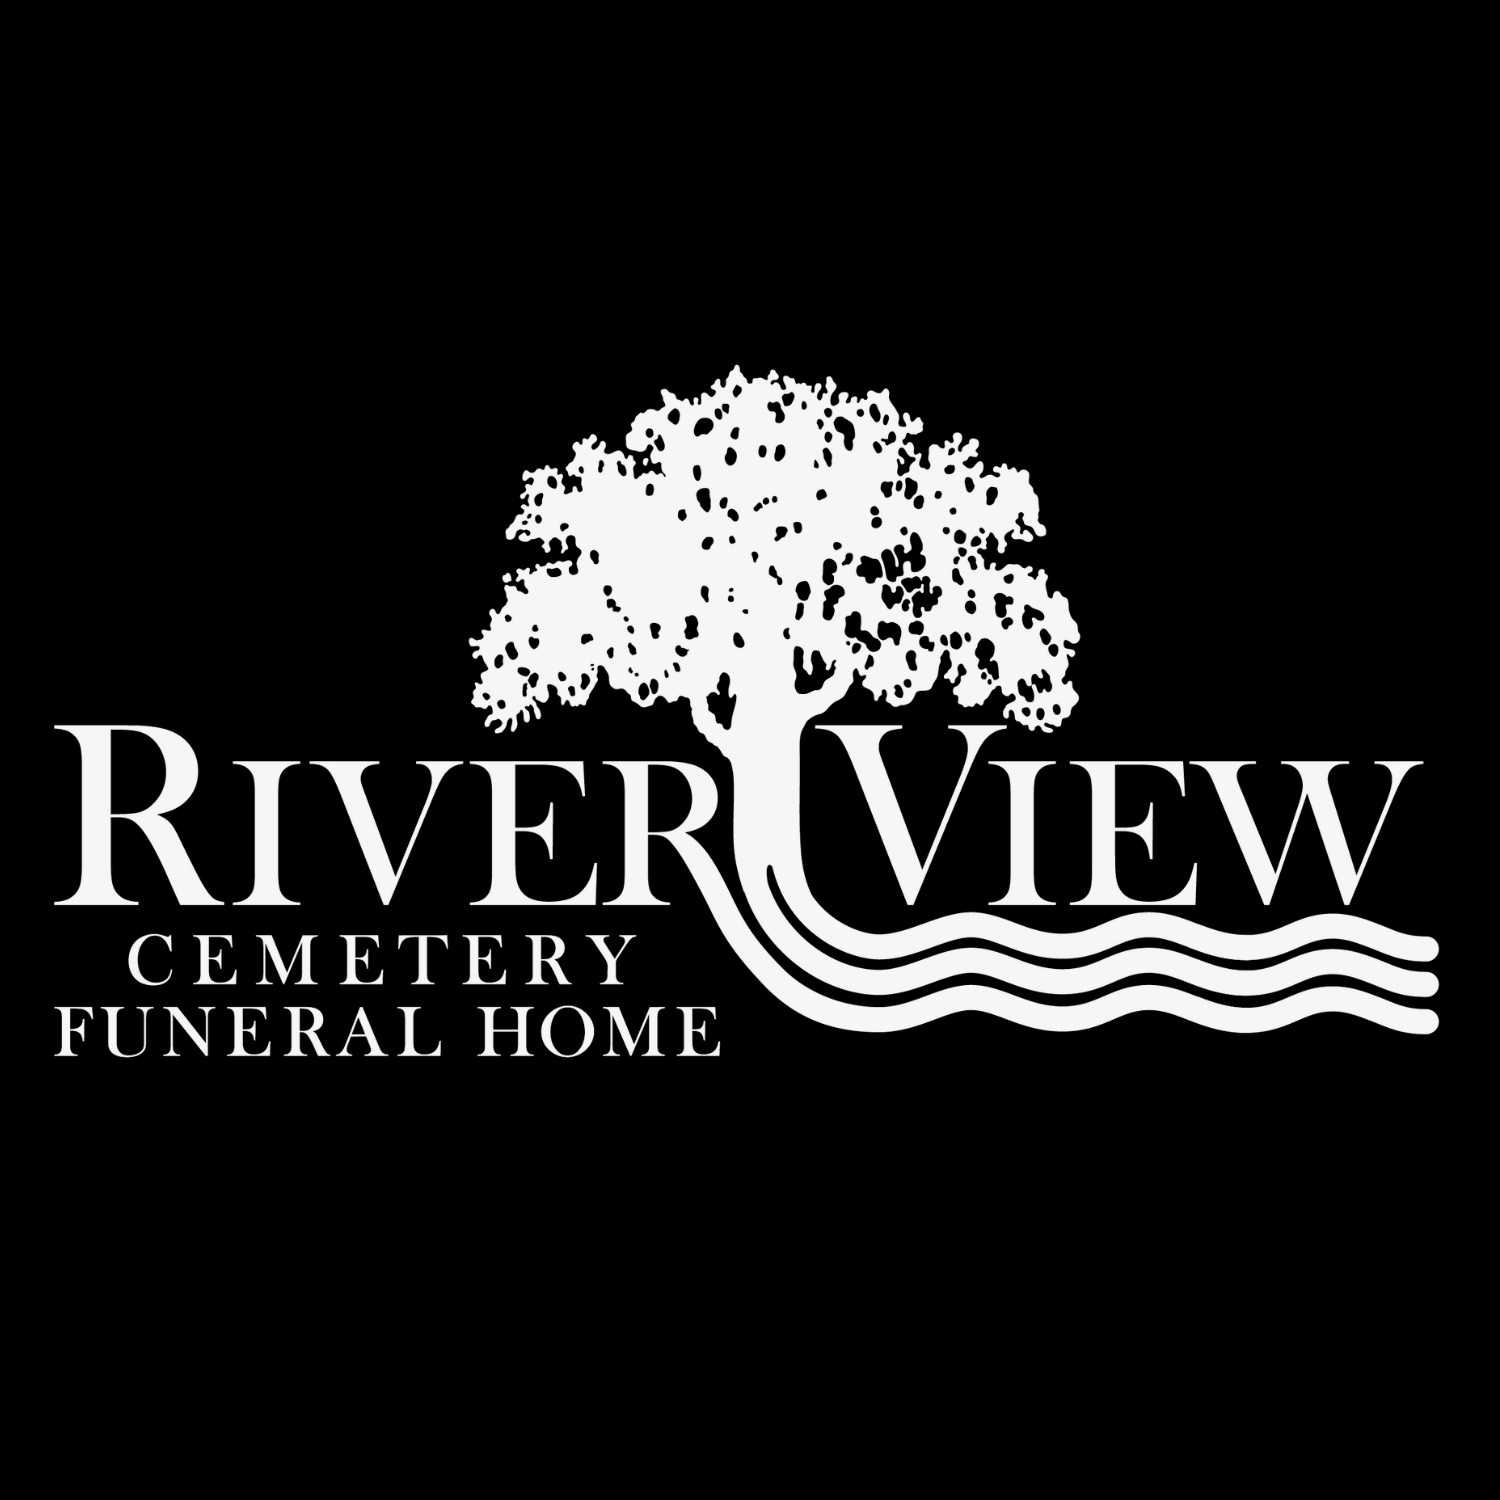 river view cemetery funeral home | funeral directors in portland